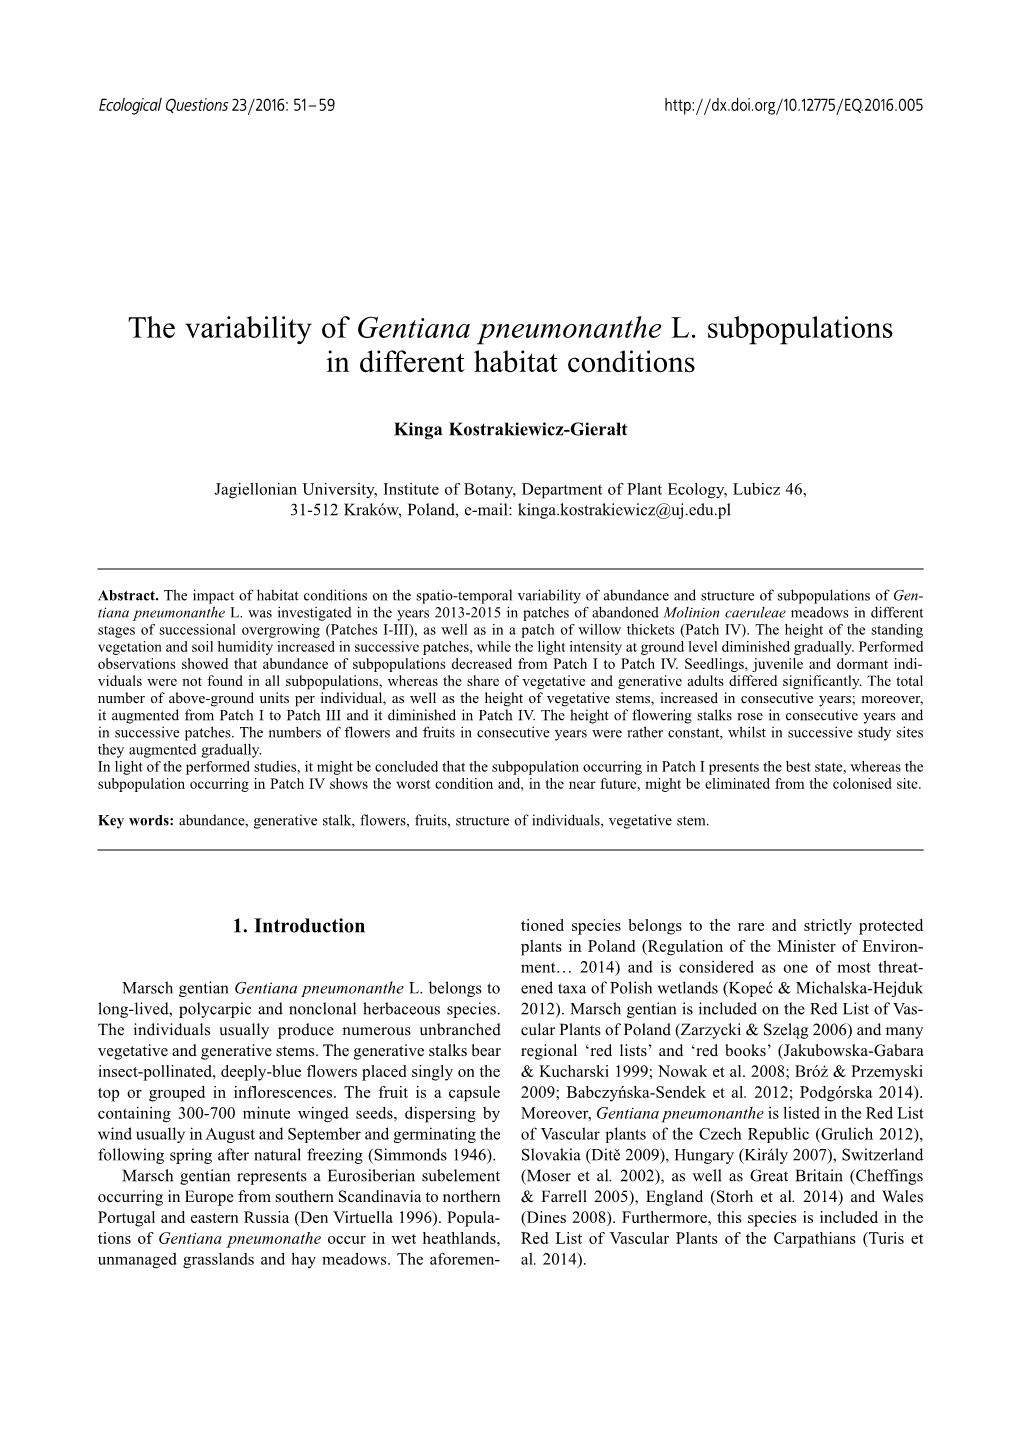 The Variability of Gentiana Pneumonanthe L. Subpopulations in Different Habitat Conditions